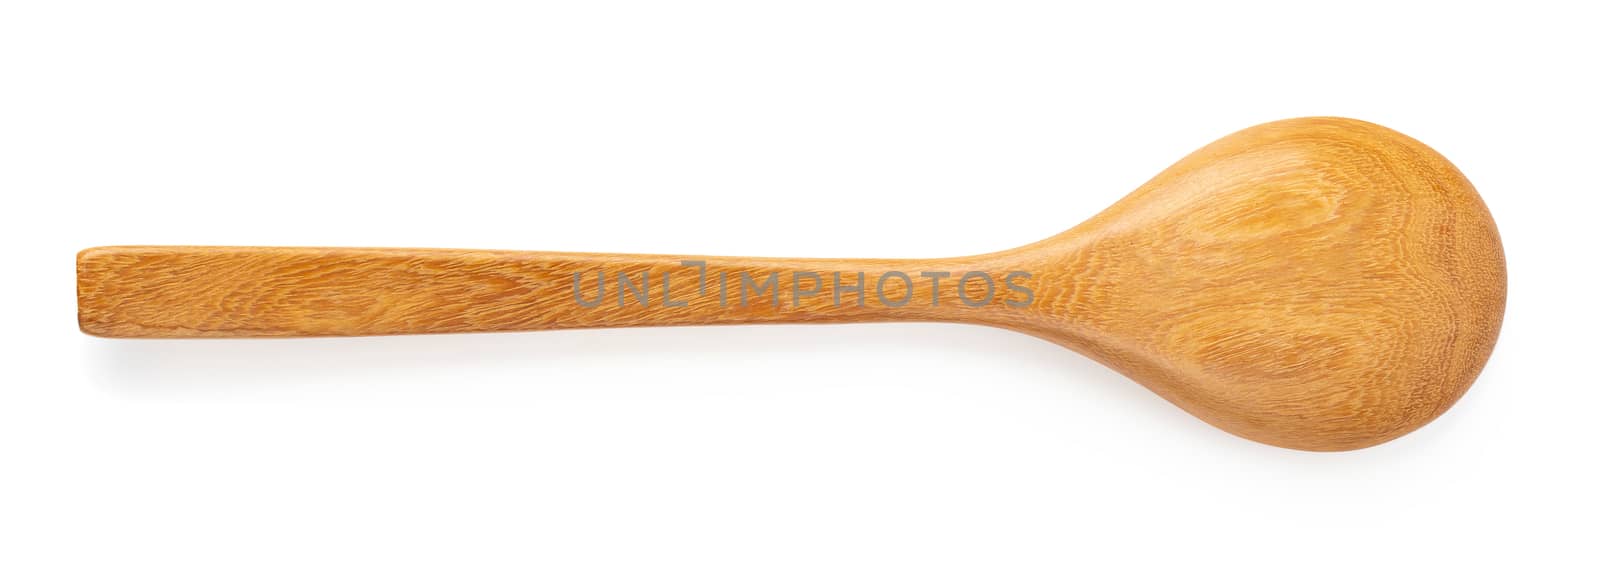 Wooden spoon isolated on a white background by kaiskynet